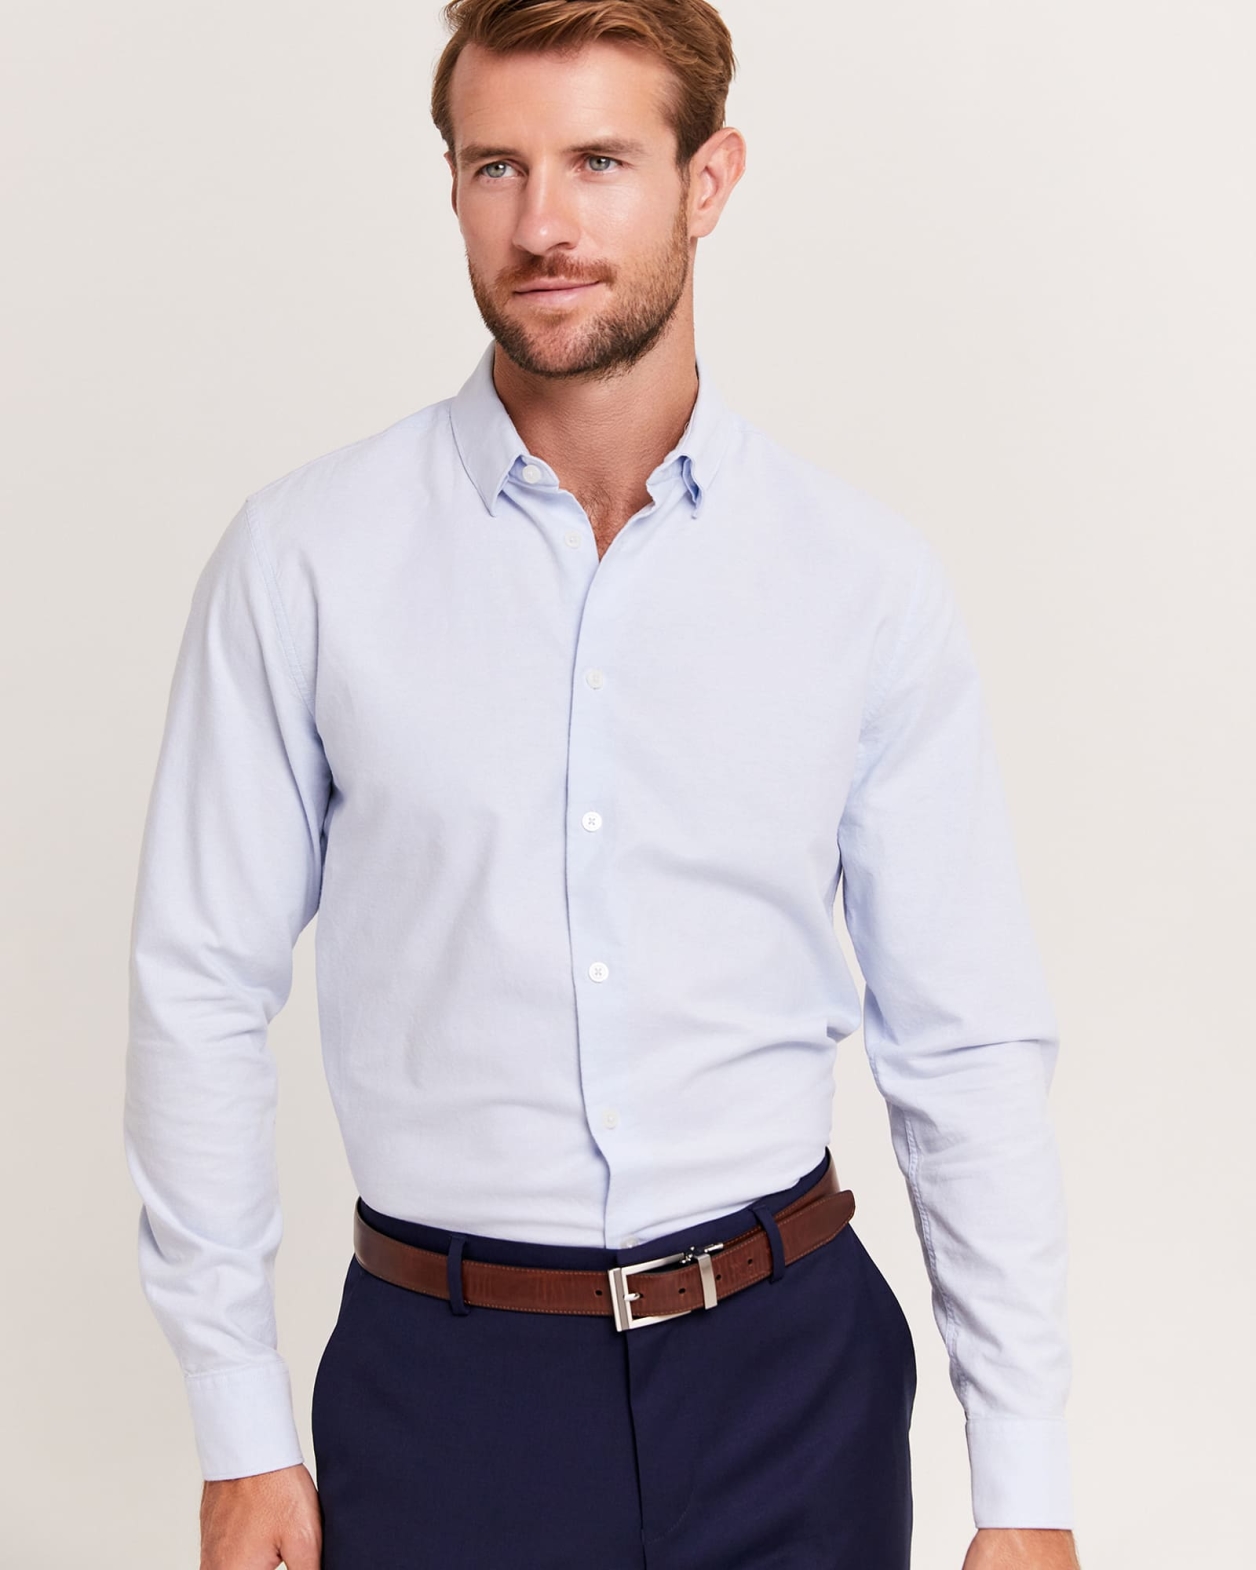 Christopher Oxford Long Sleeve Classic Shirt in SKY